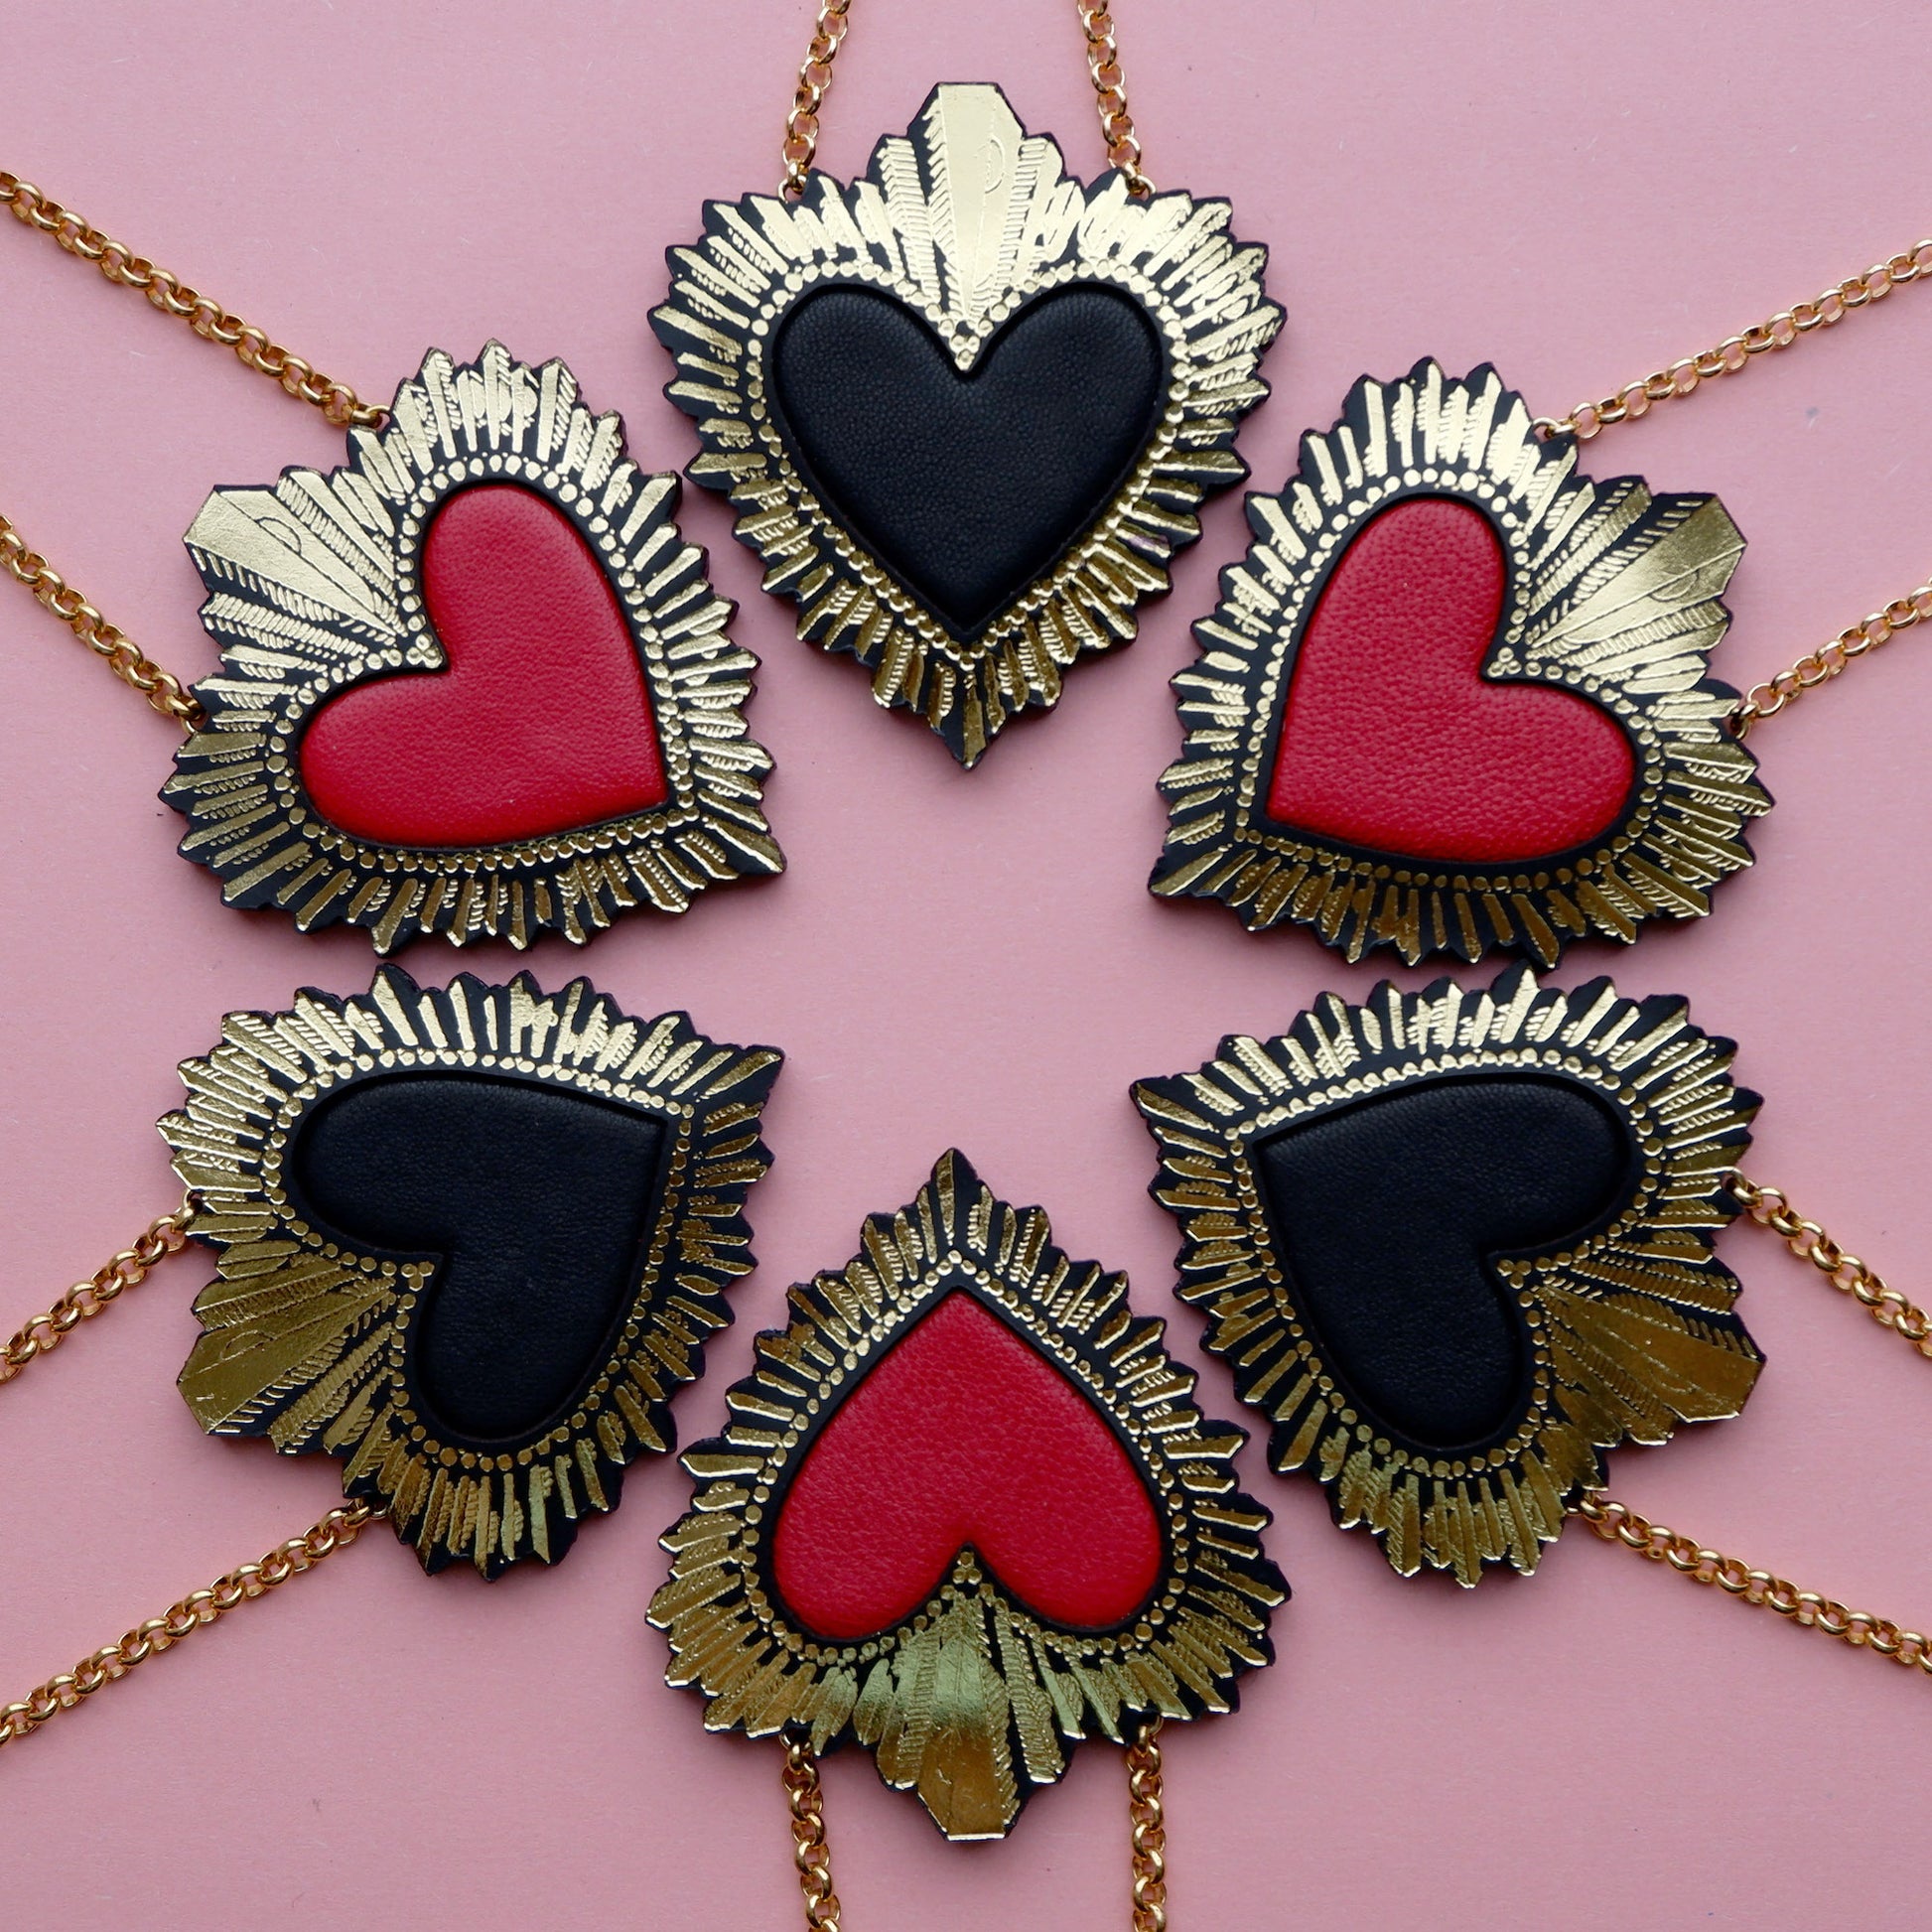 display of red and black leather sacred heart pendant necklaces, on gold belcher chain, on pink background